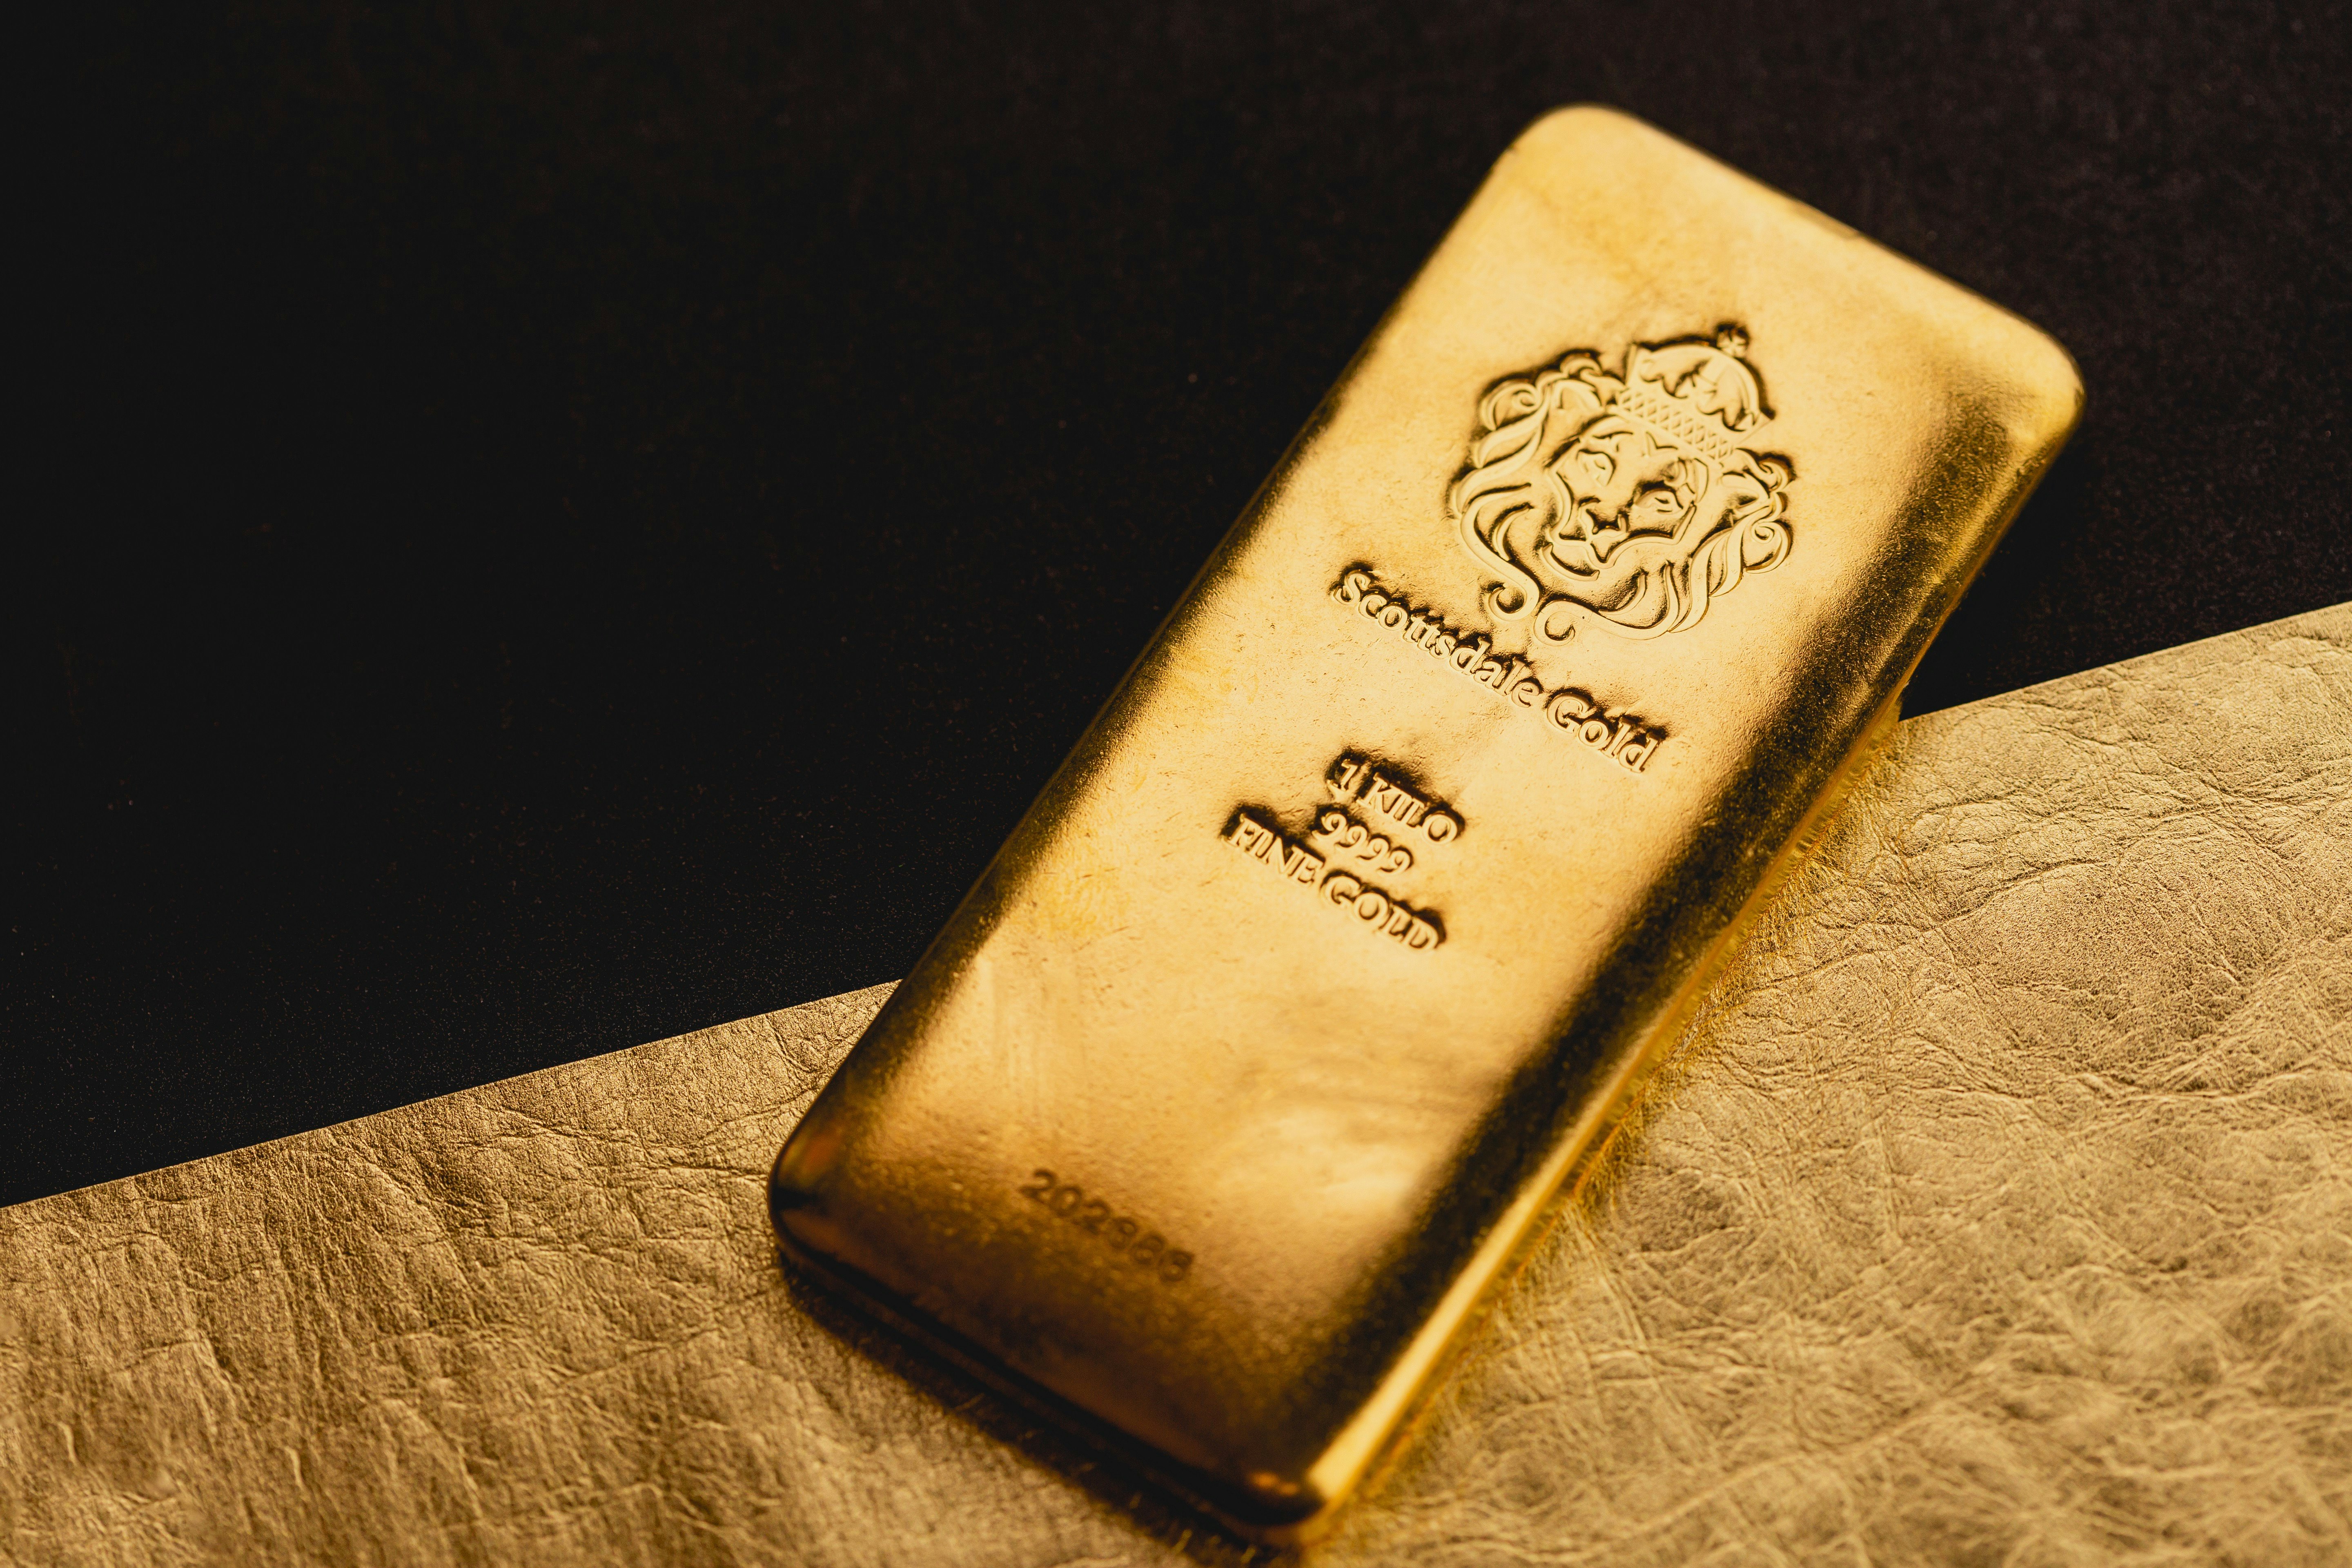 Beautiful 1 Kilogram Gold Bullion Bars by Scottsdale Mint sitting on a dark background. Please give a shoutout to Scottsdale Mint if able! Shop online for the most beautiful bullion at ScottsdaleMint.com!